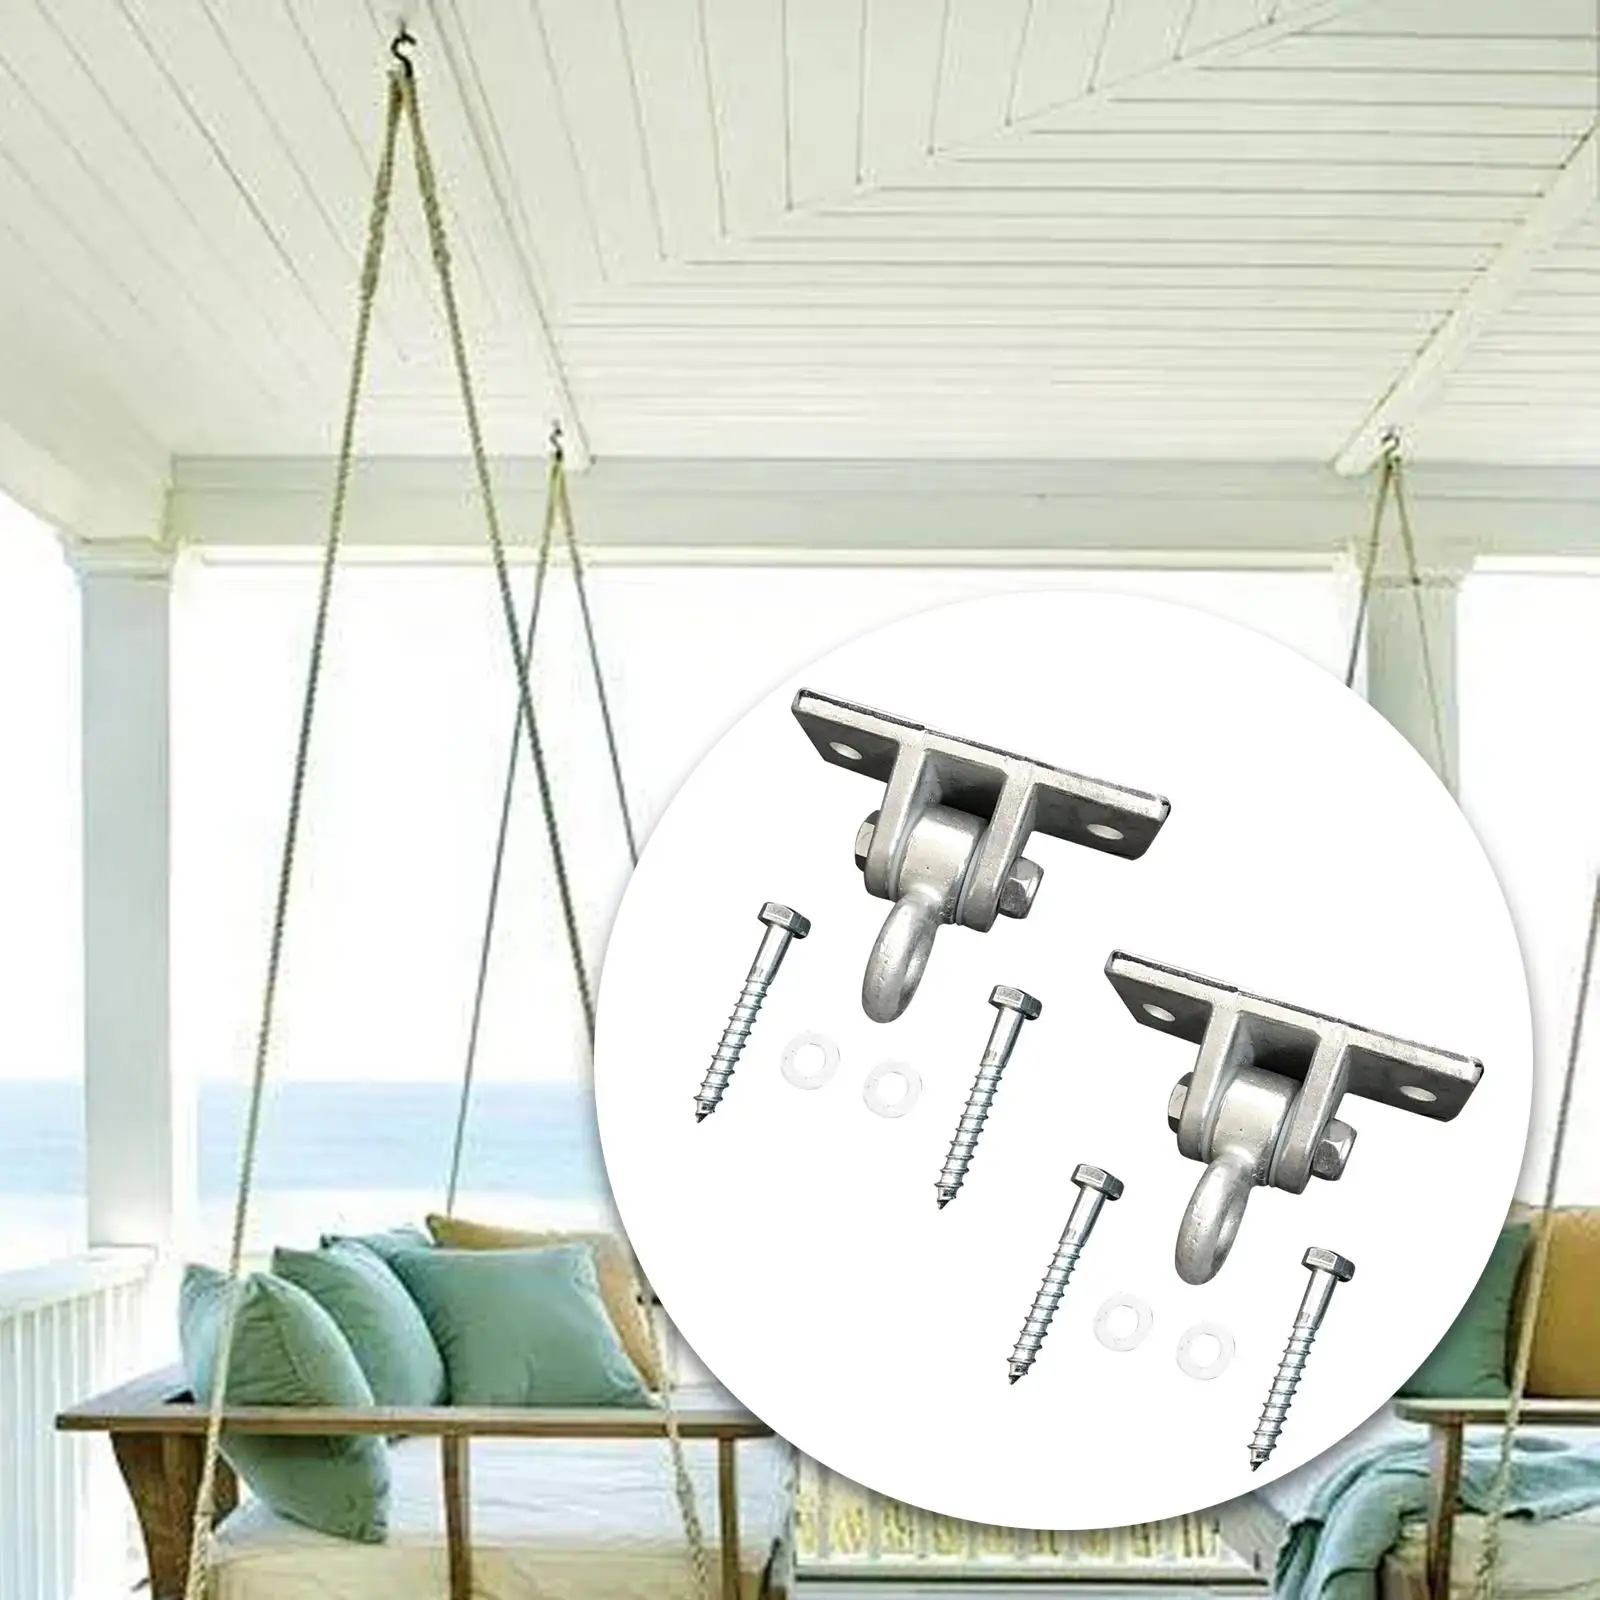 2Pcs Swing Hangers Screws Bolts Hanging Fixed Base Swing Set Hangers for Playground Wooden Sets Trapeze Yoga Seat Indoor Outdoor